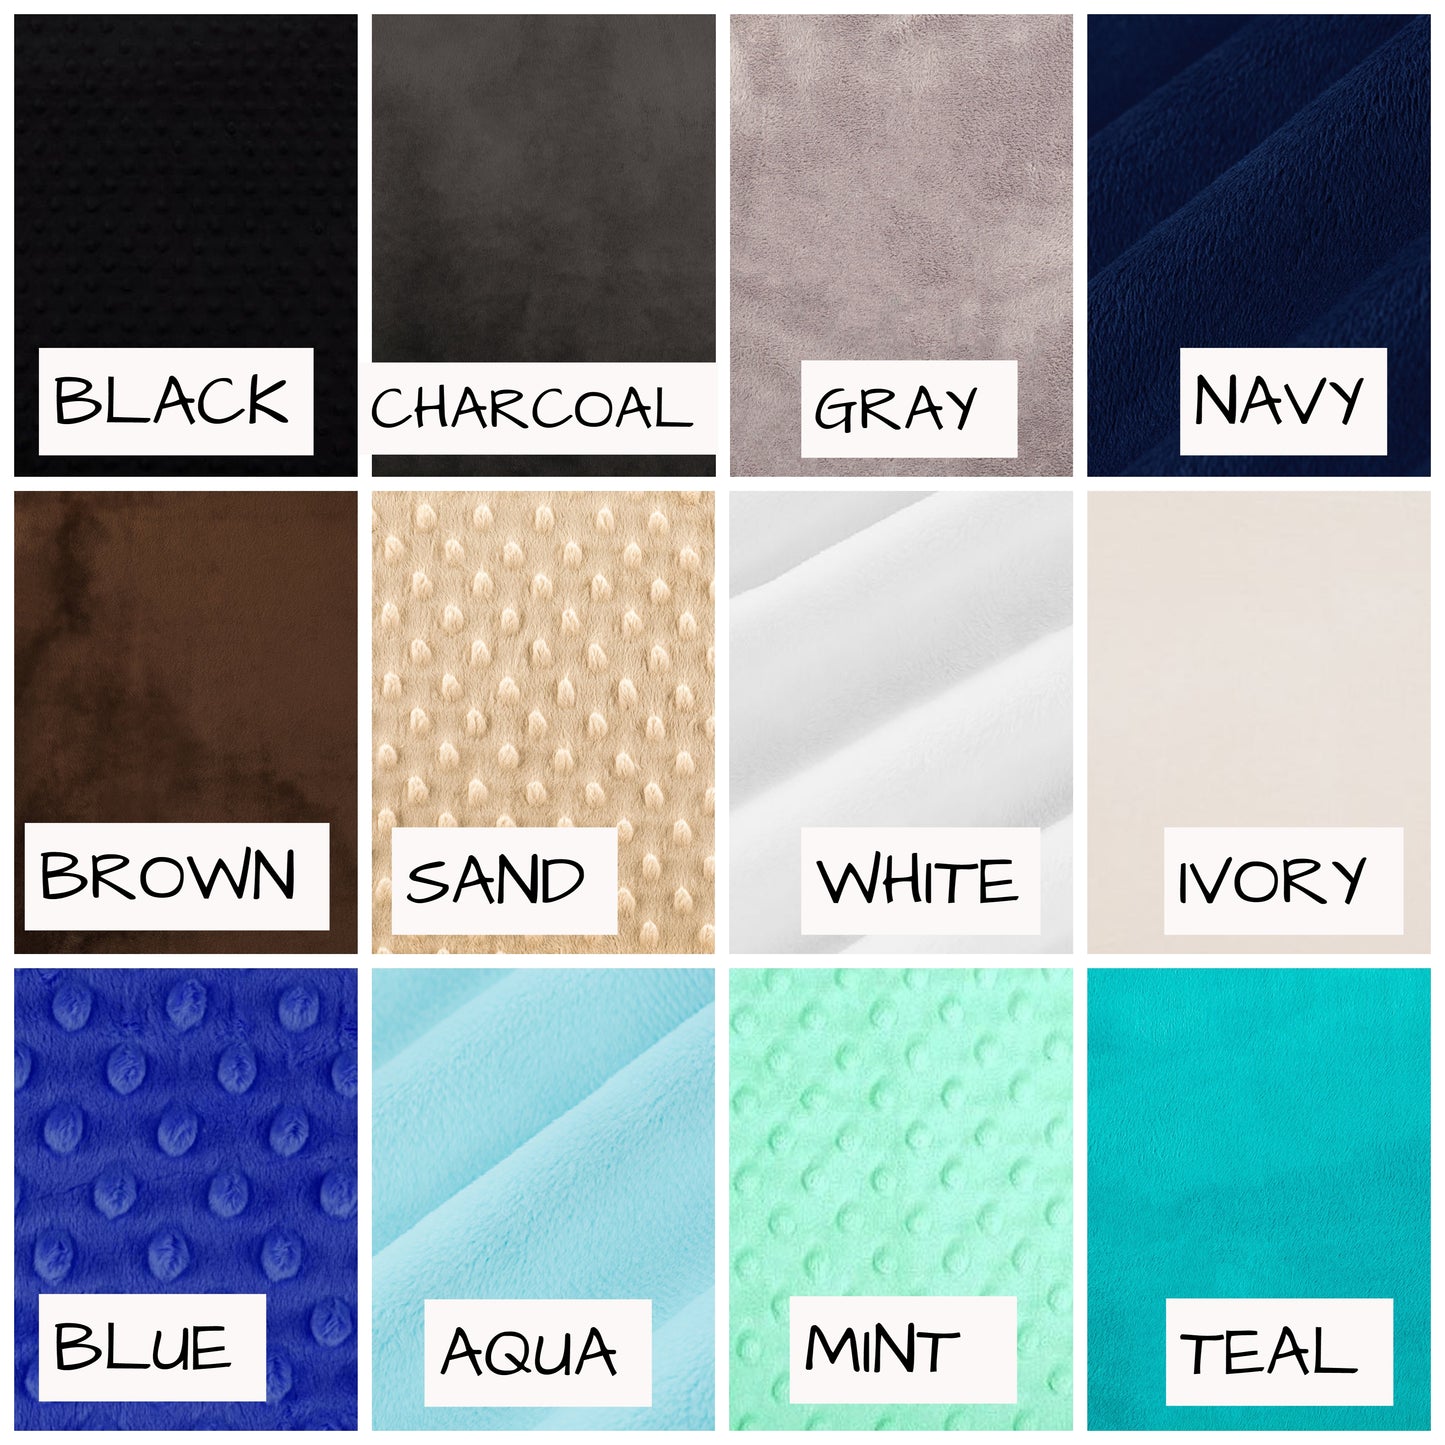 minky colors available - black, charcoal, gray, navy, brown, sand, white, ivory, blue, aqua, mint & teal